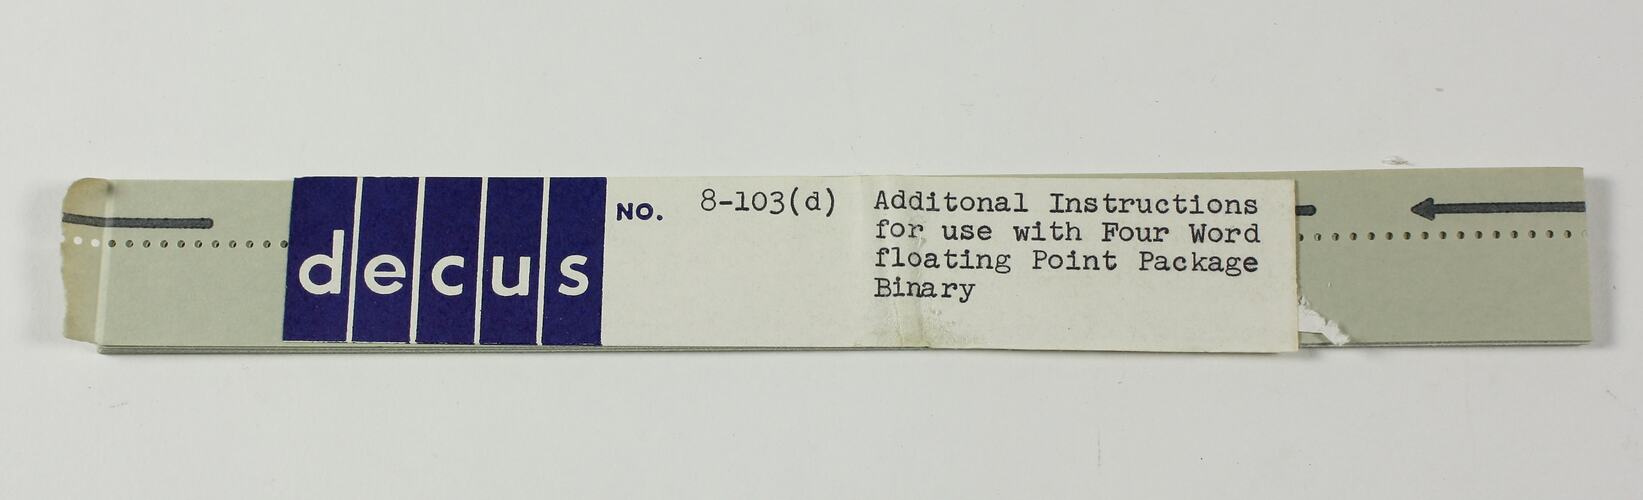 Paper Tape - DECUS, '8-103d Additional Instructions for Use with Four Word Floating Point Package, Binary'